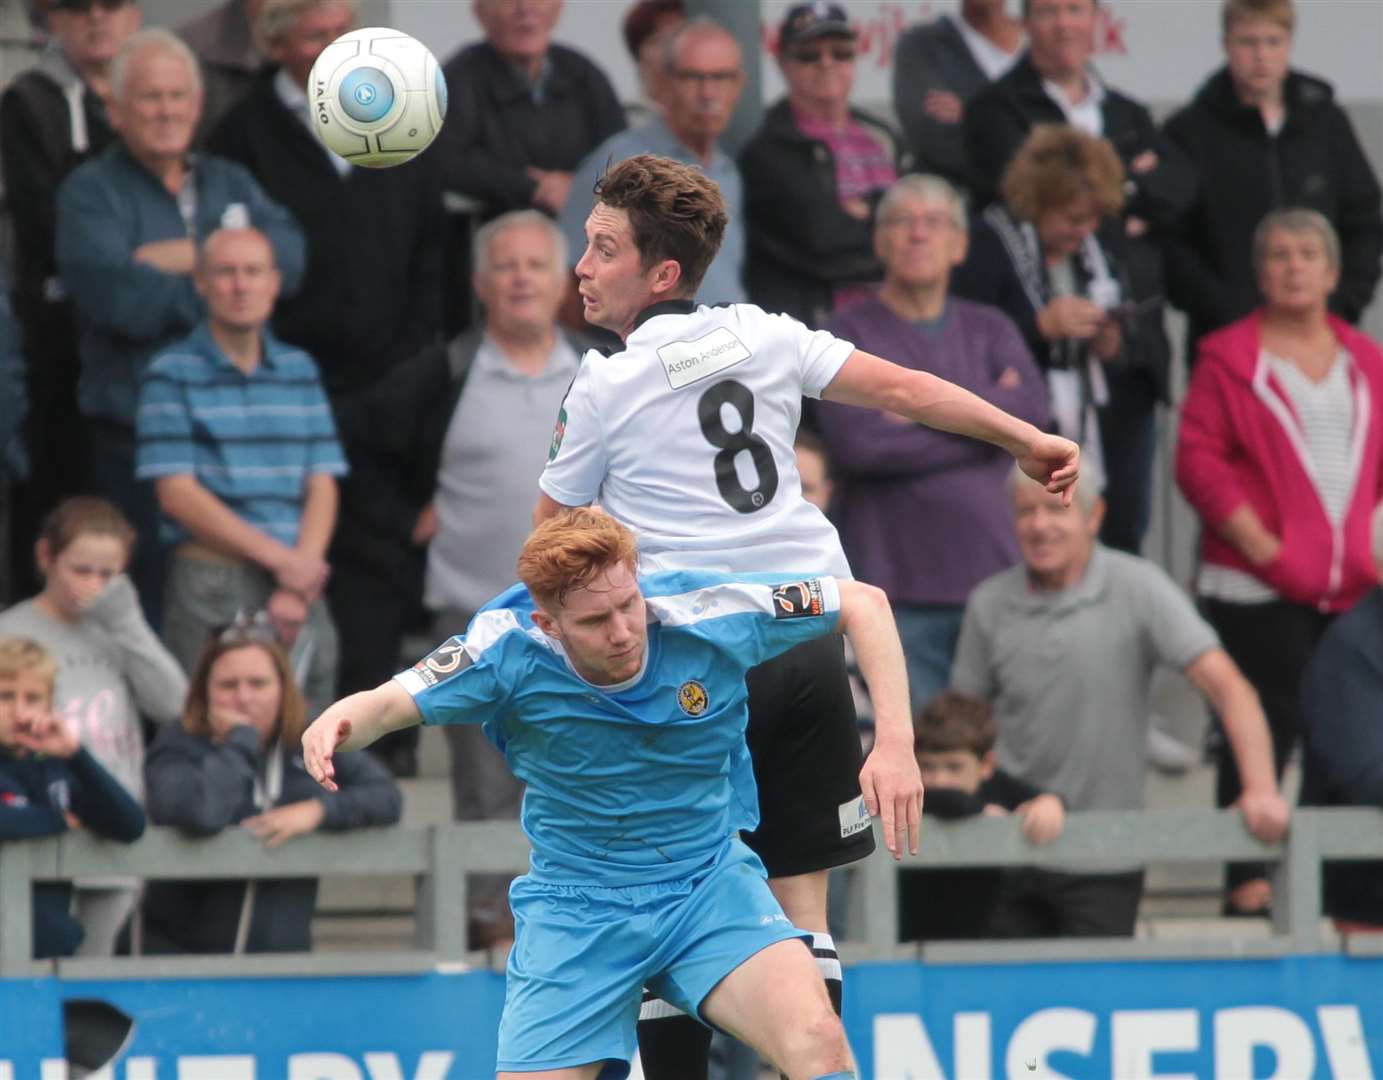 Lee Noble excels for Dartford on his return from injury Picture: John Westhrop